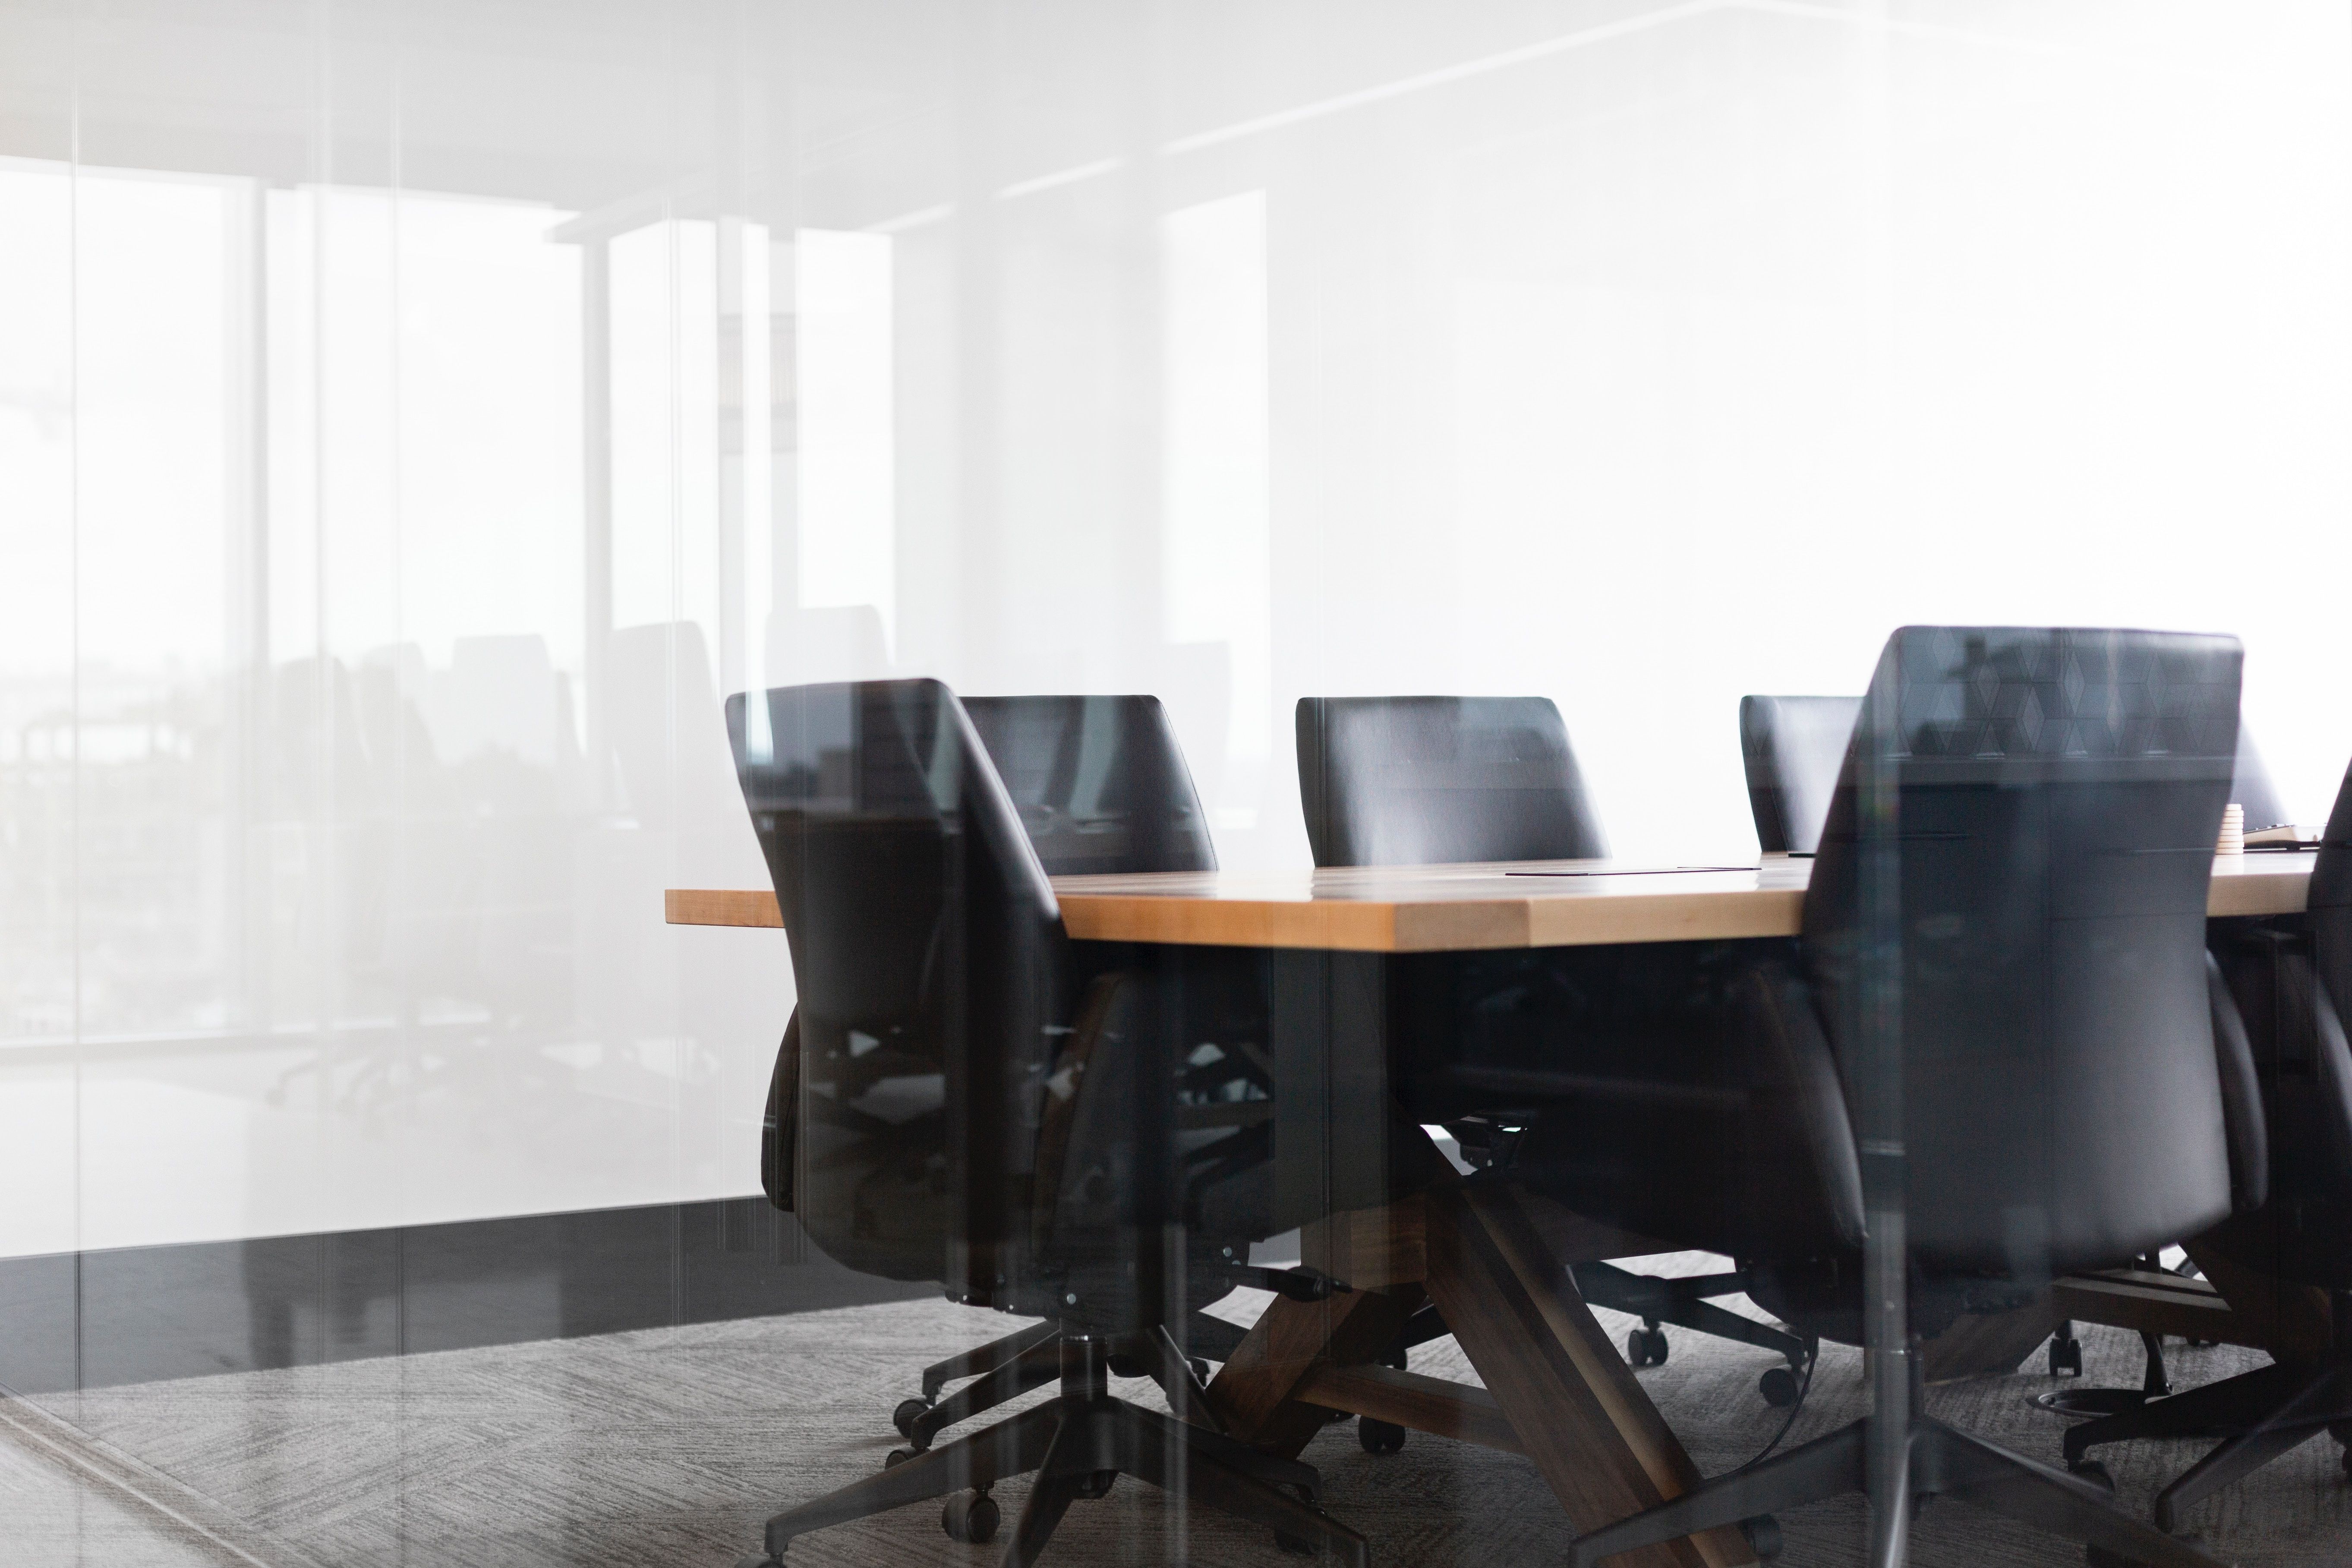 5450x3633 #business, #meeting, #clean, #table, #empty